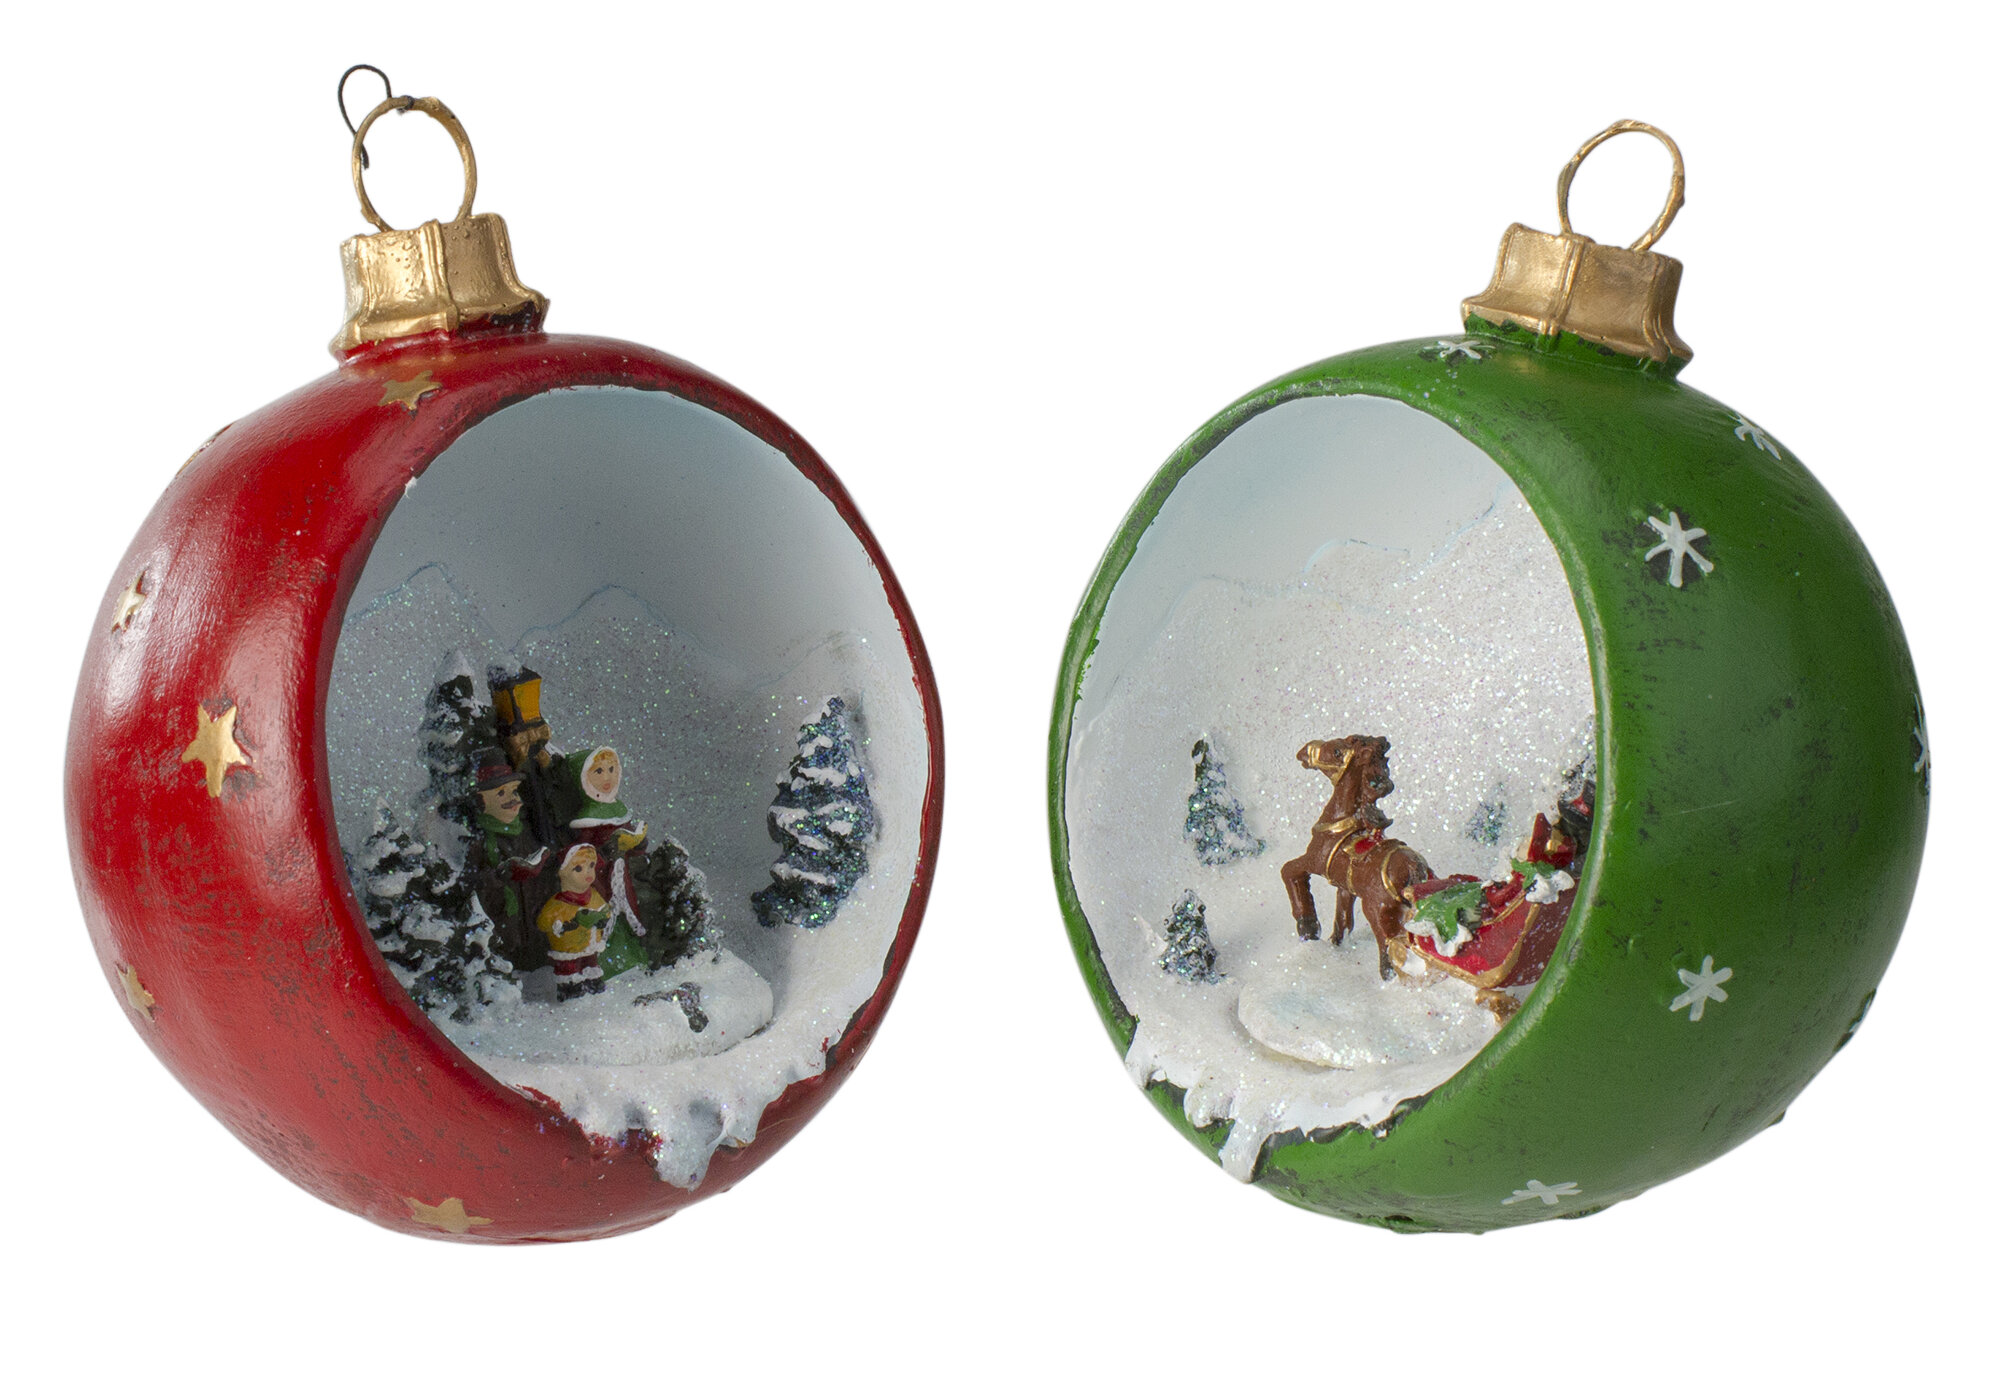 Home Essentials Red & Green 2-Piece Holiday Ornament Sipper Set